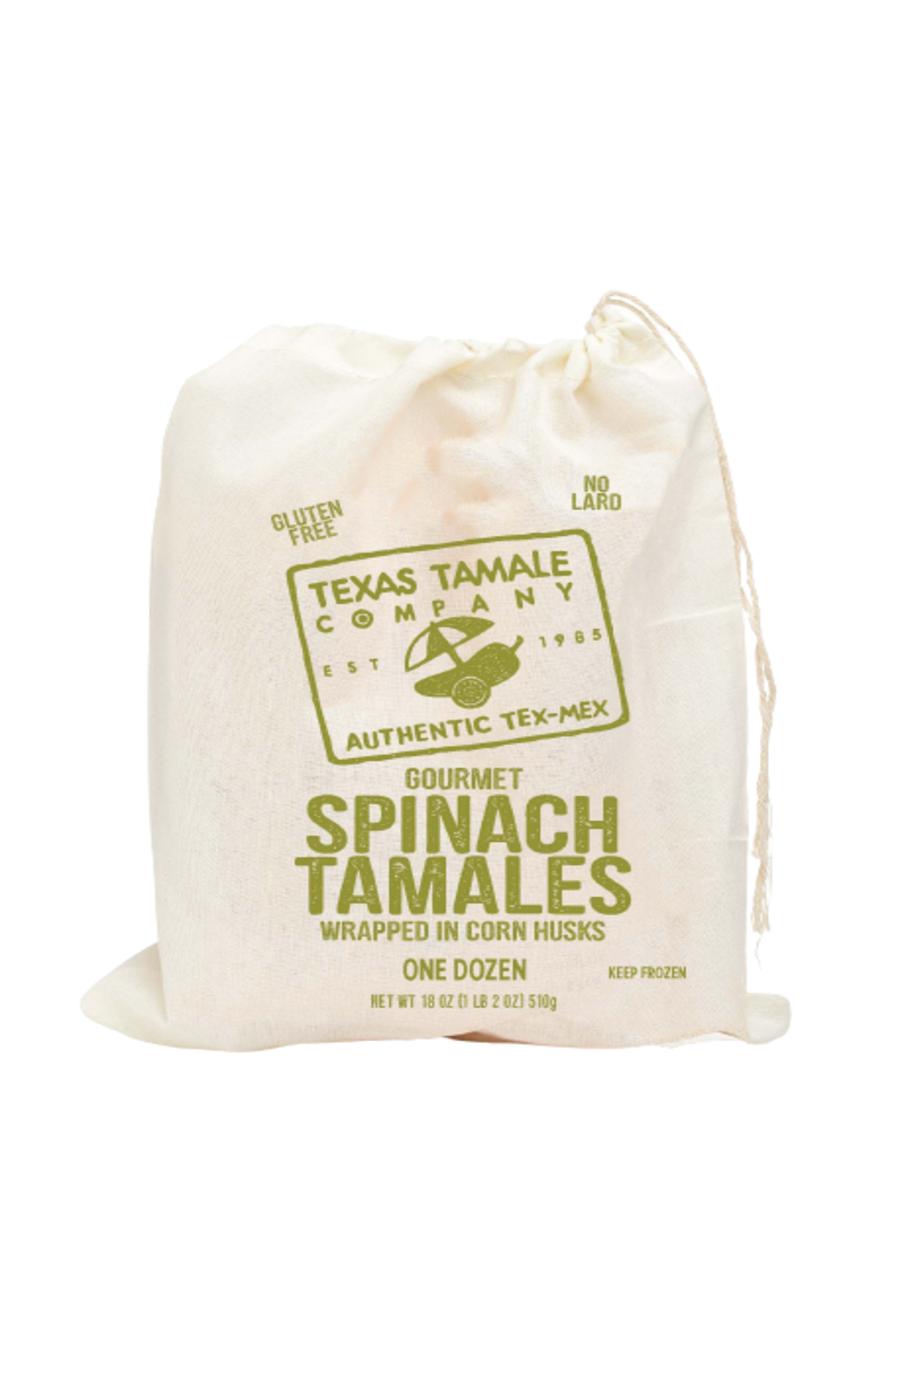 Texas Tamale Company Gourmet Spinach Tamales; image 1 of 2